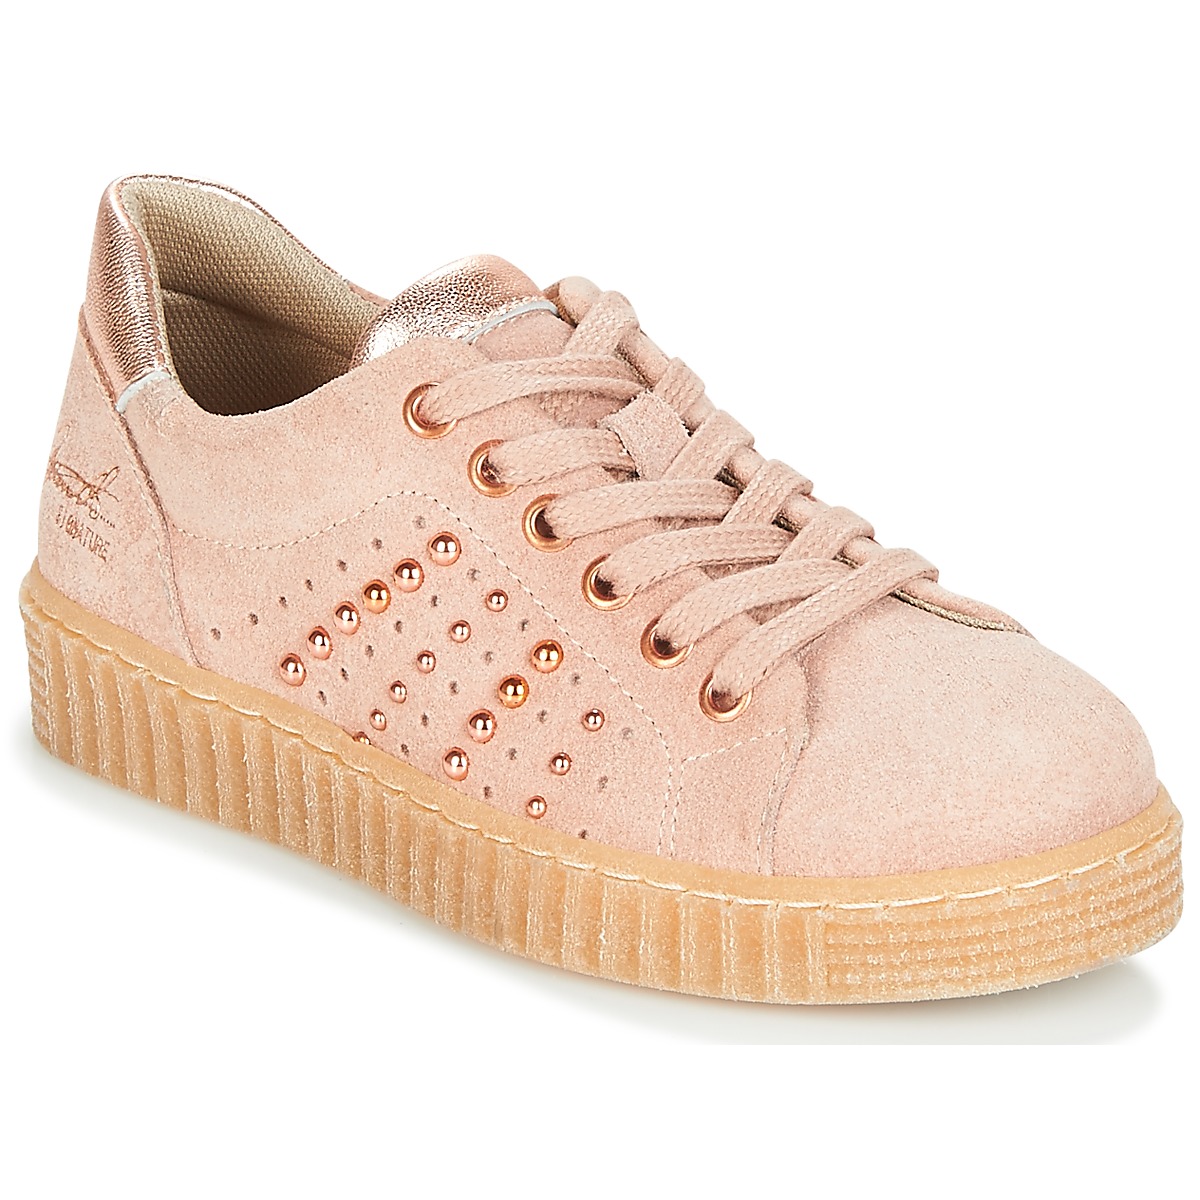 Chaussures Fille Baskets basses Bullboxer AIB006 Rose